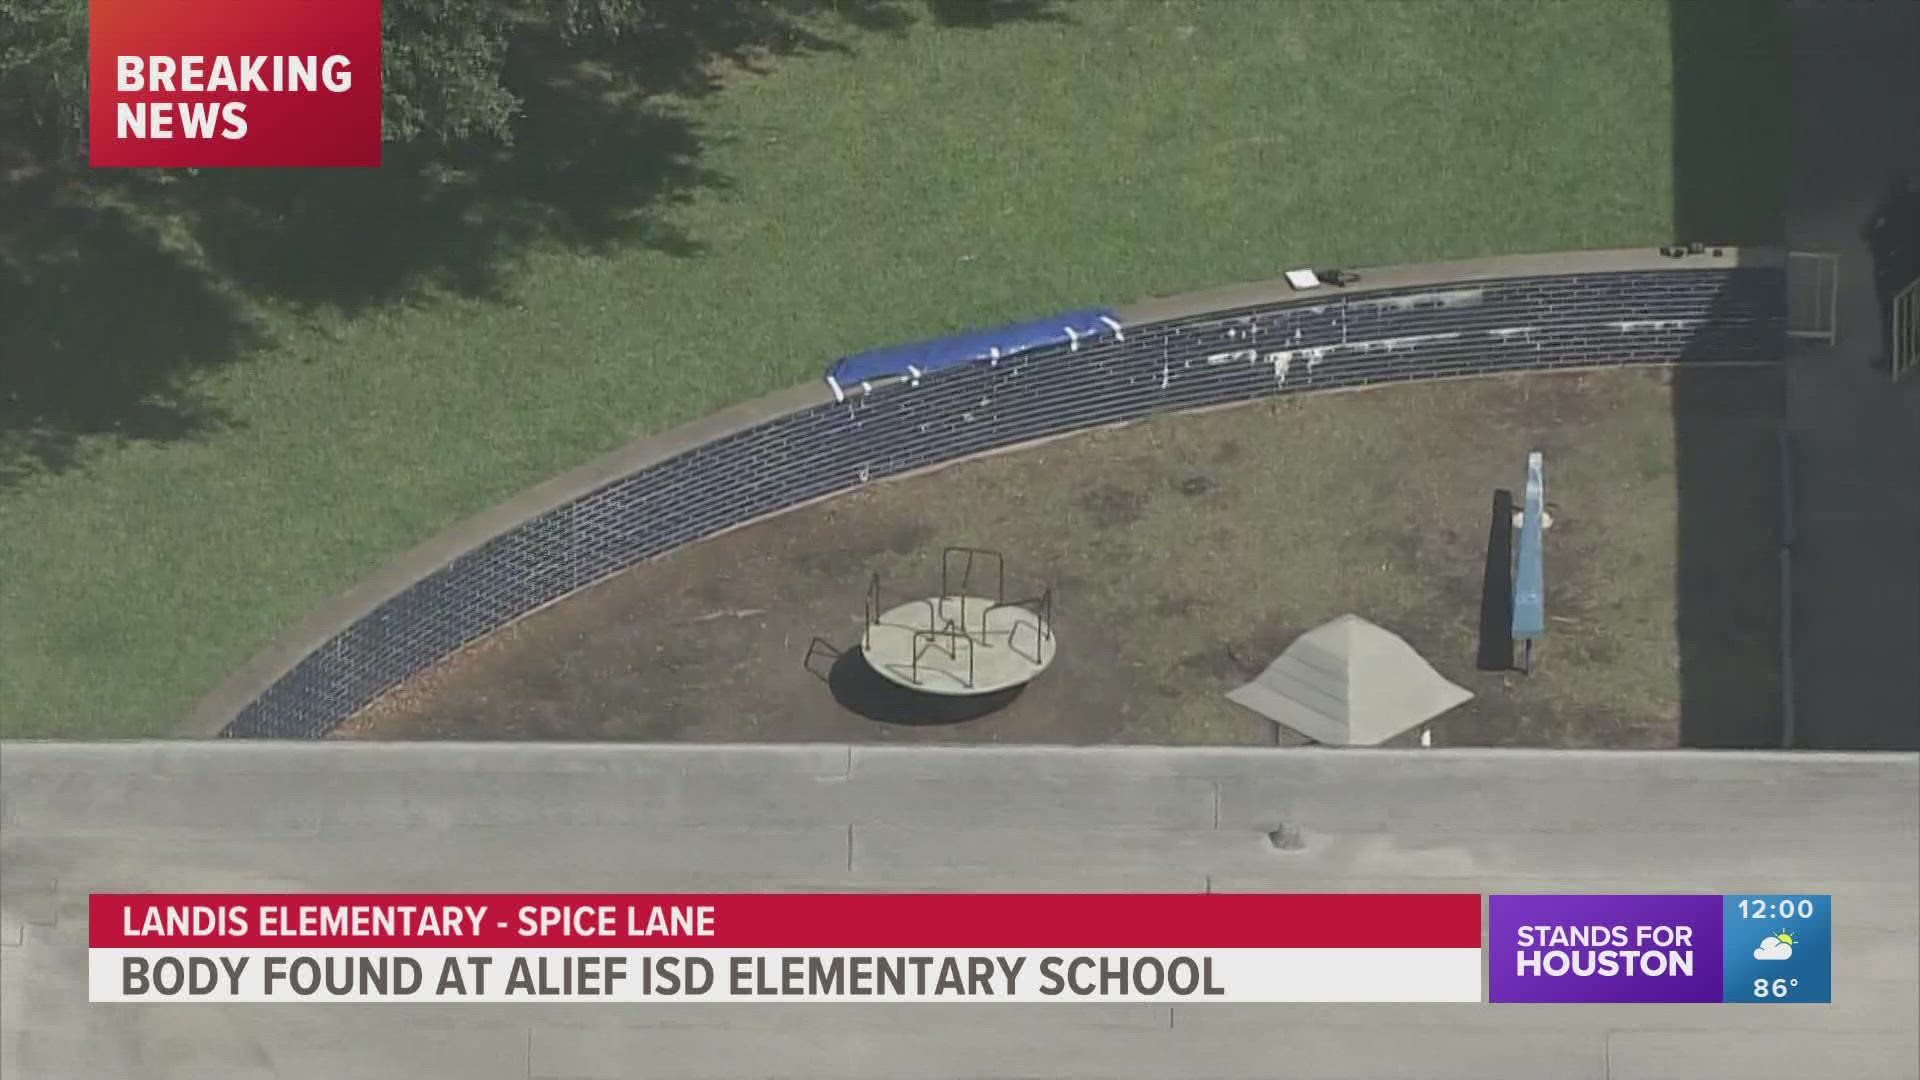 The body was discovered Monday morning near an Alief ISD elementary school.